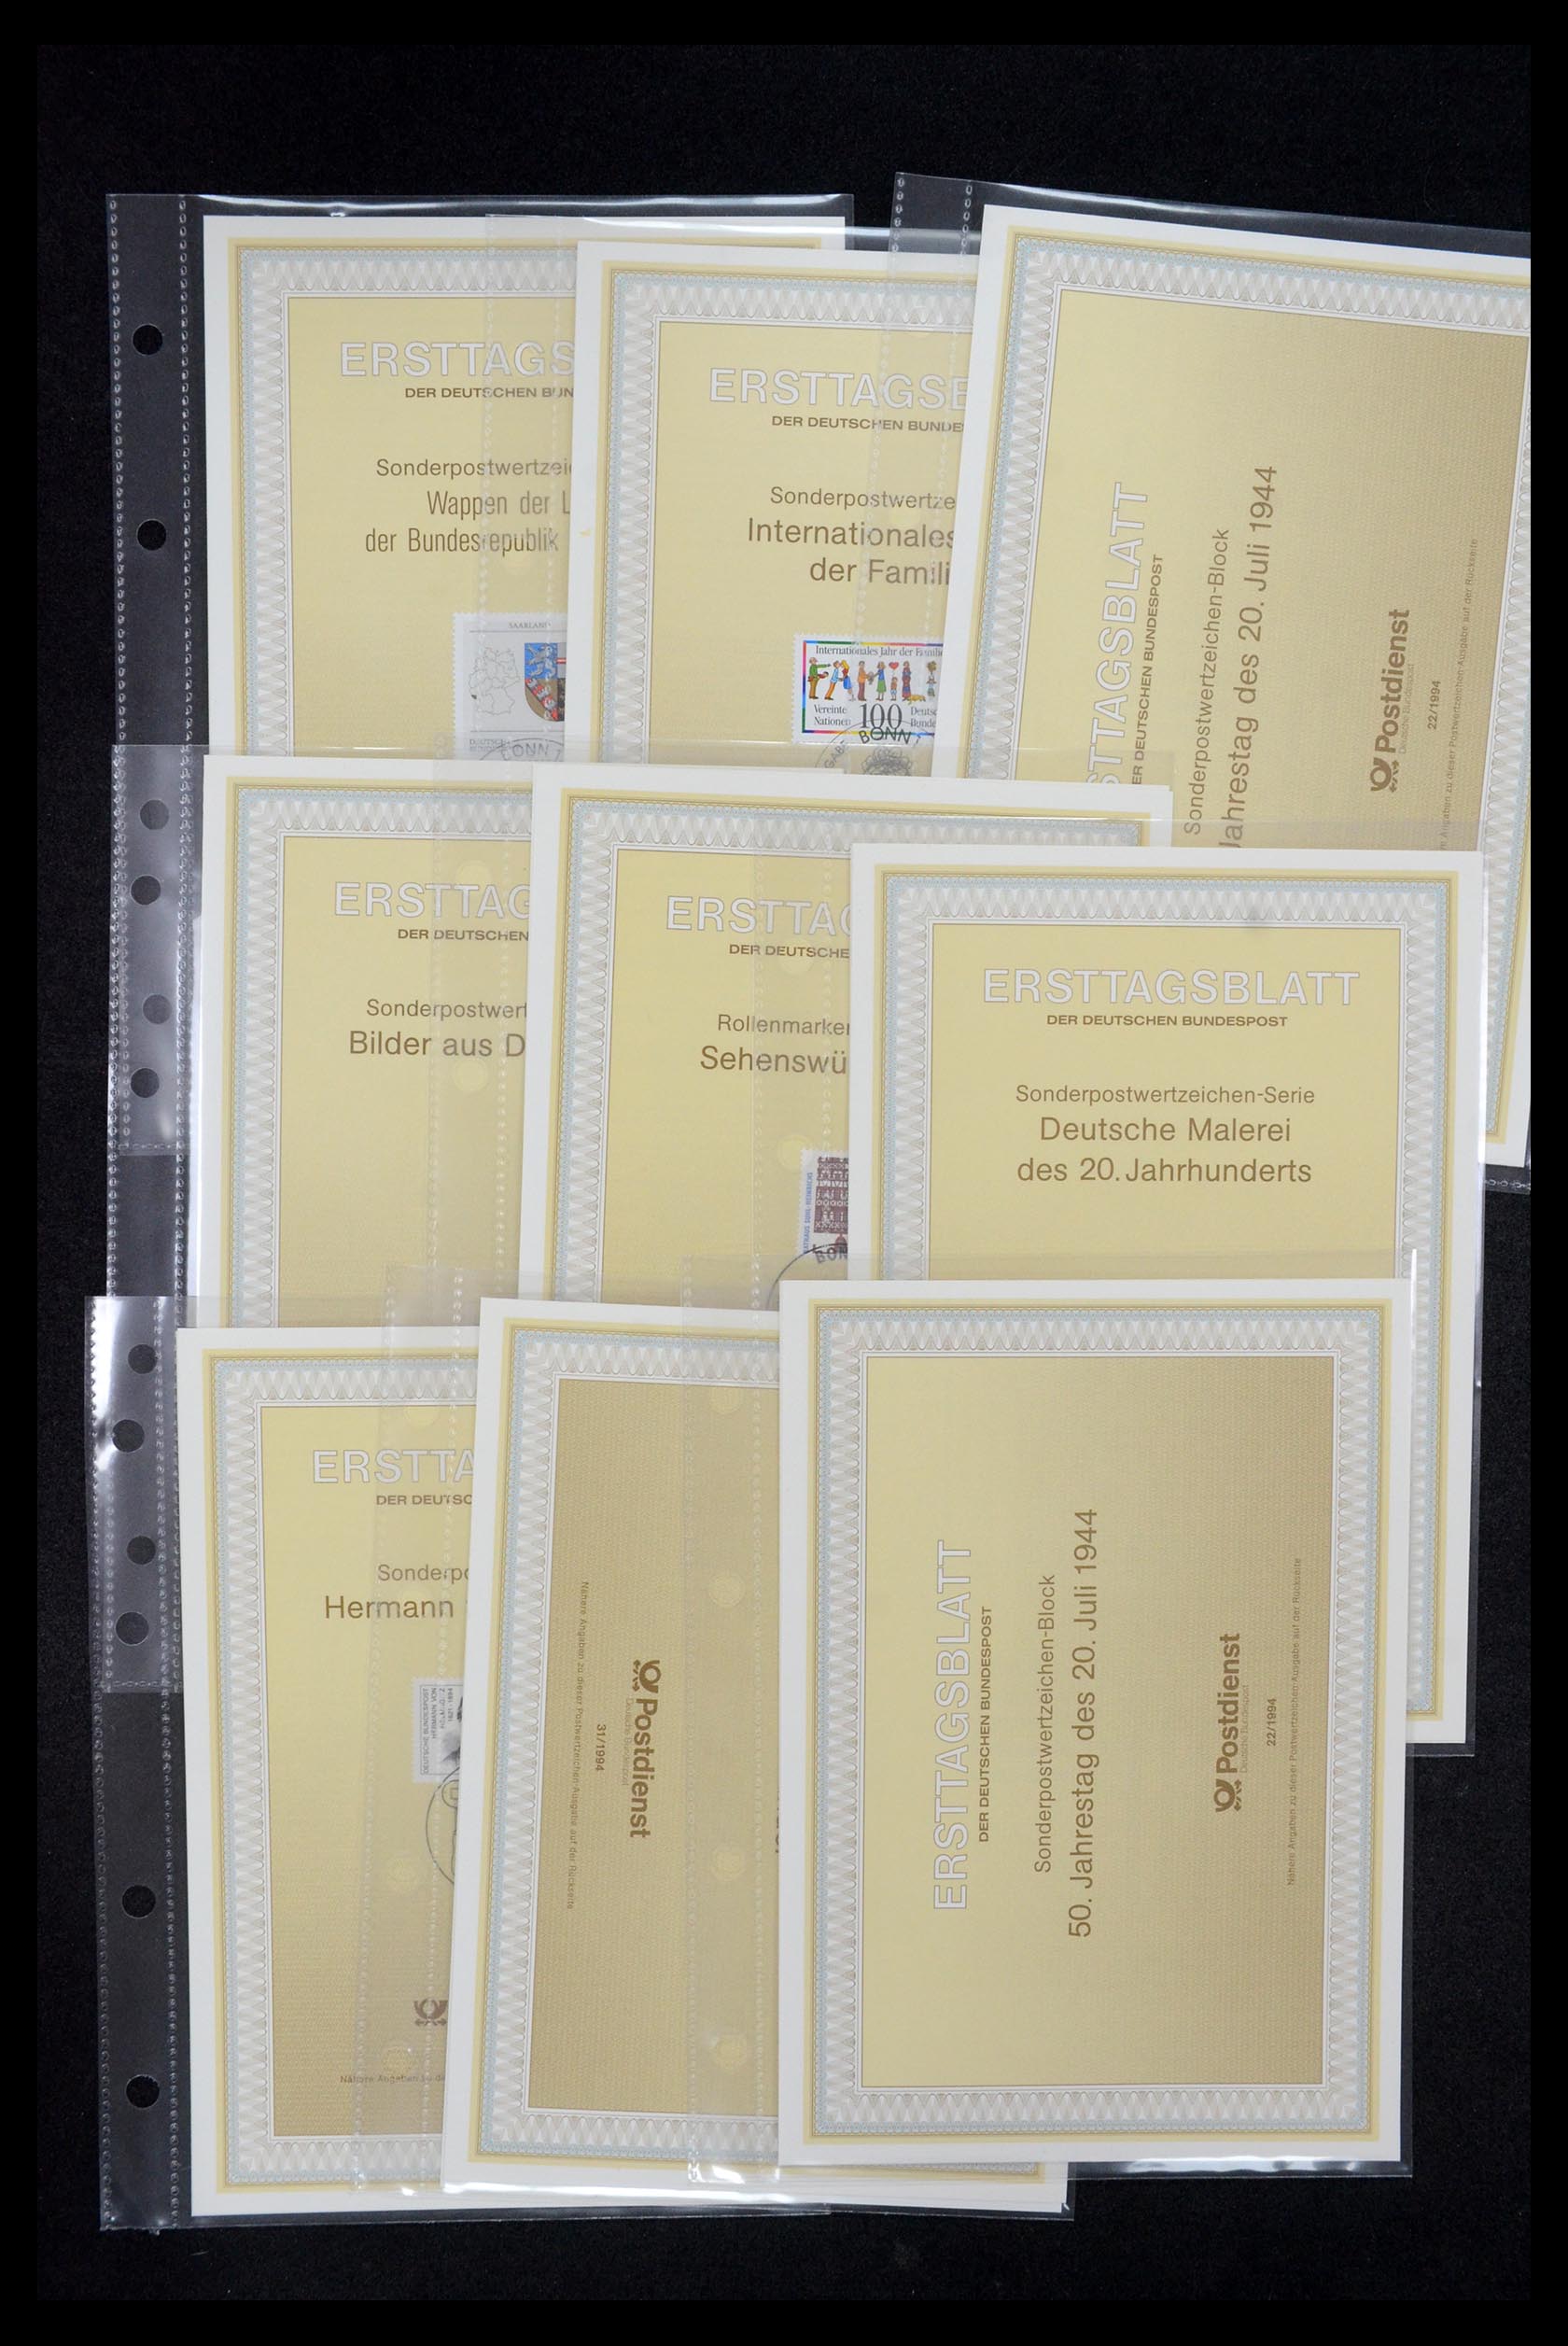 35492 255 - Stamp Collection 35492 Bundespost first day sheets 1975-2016!